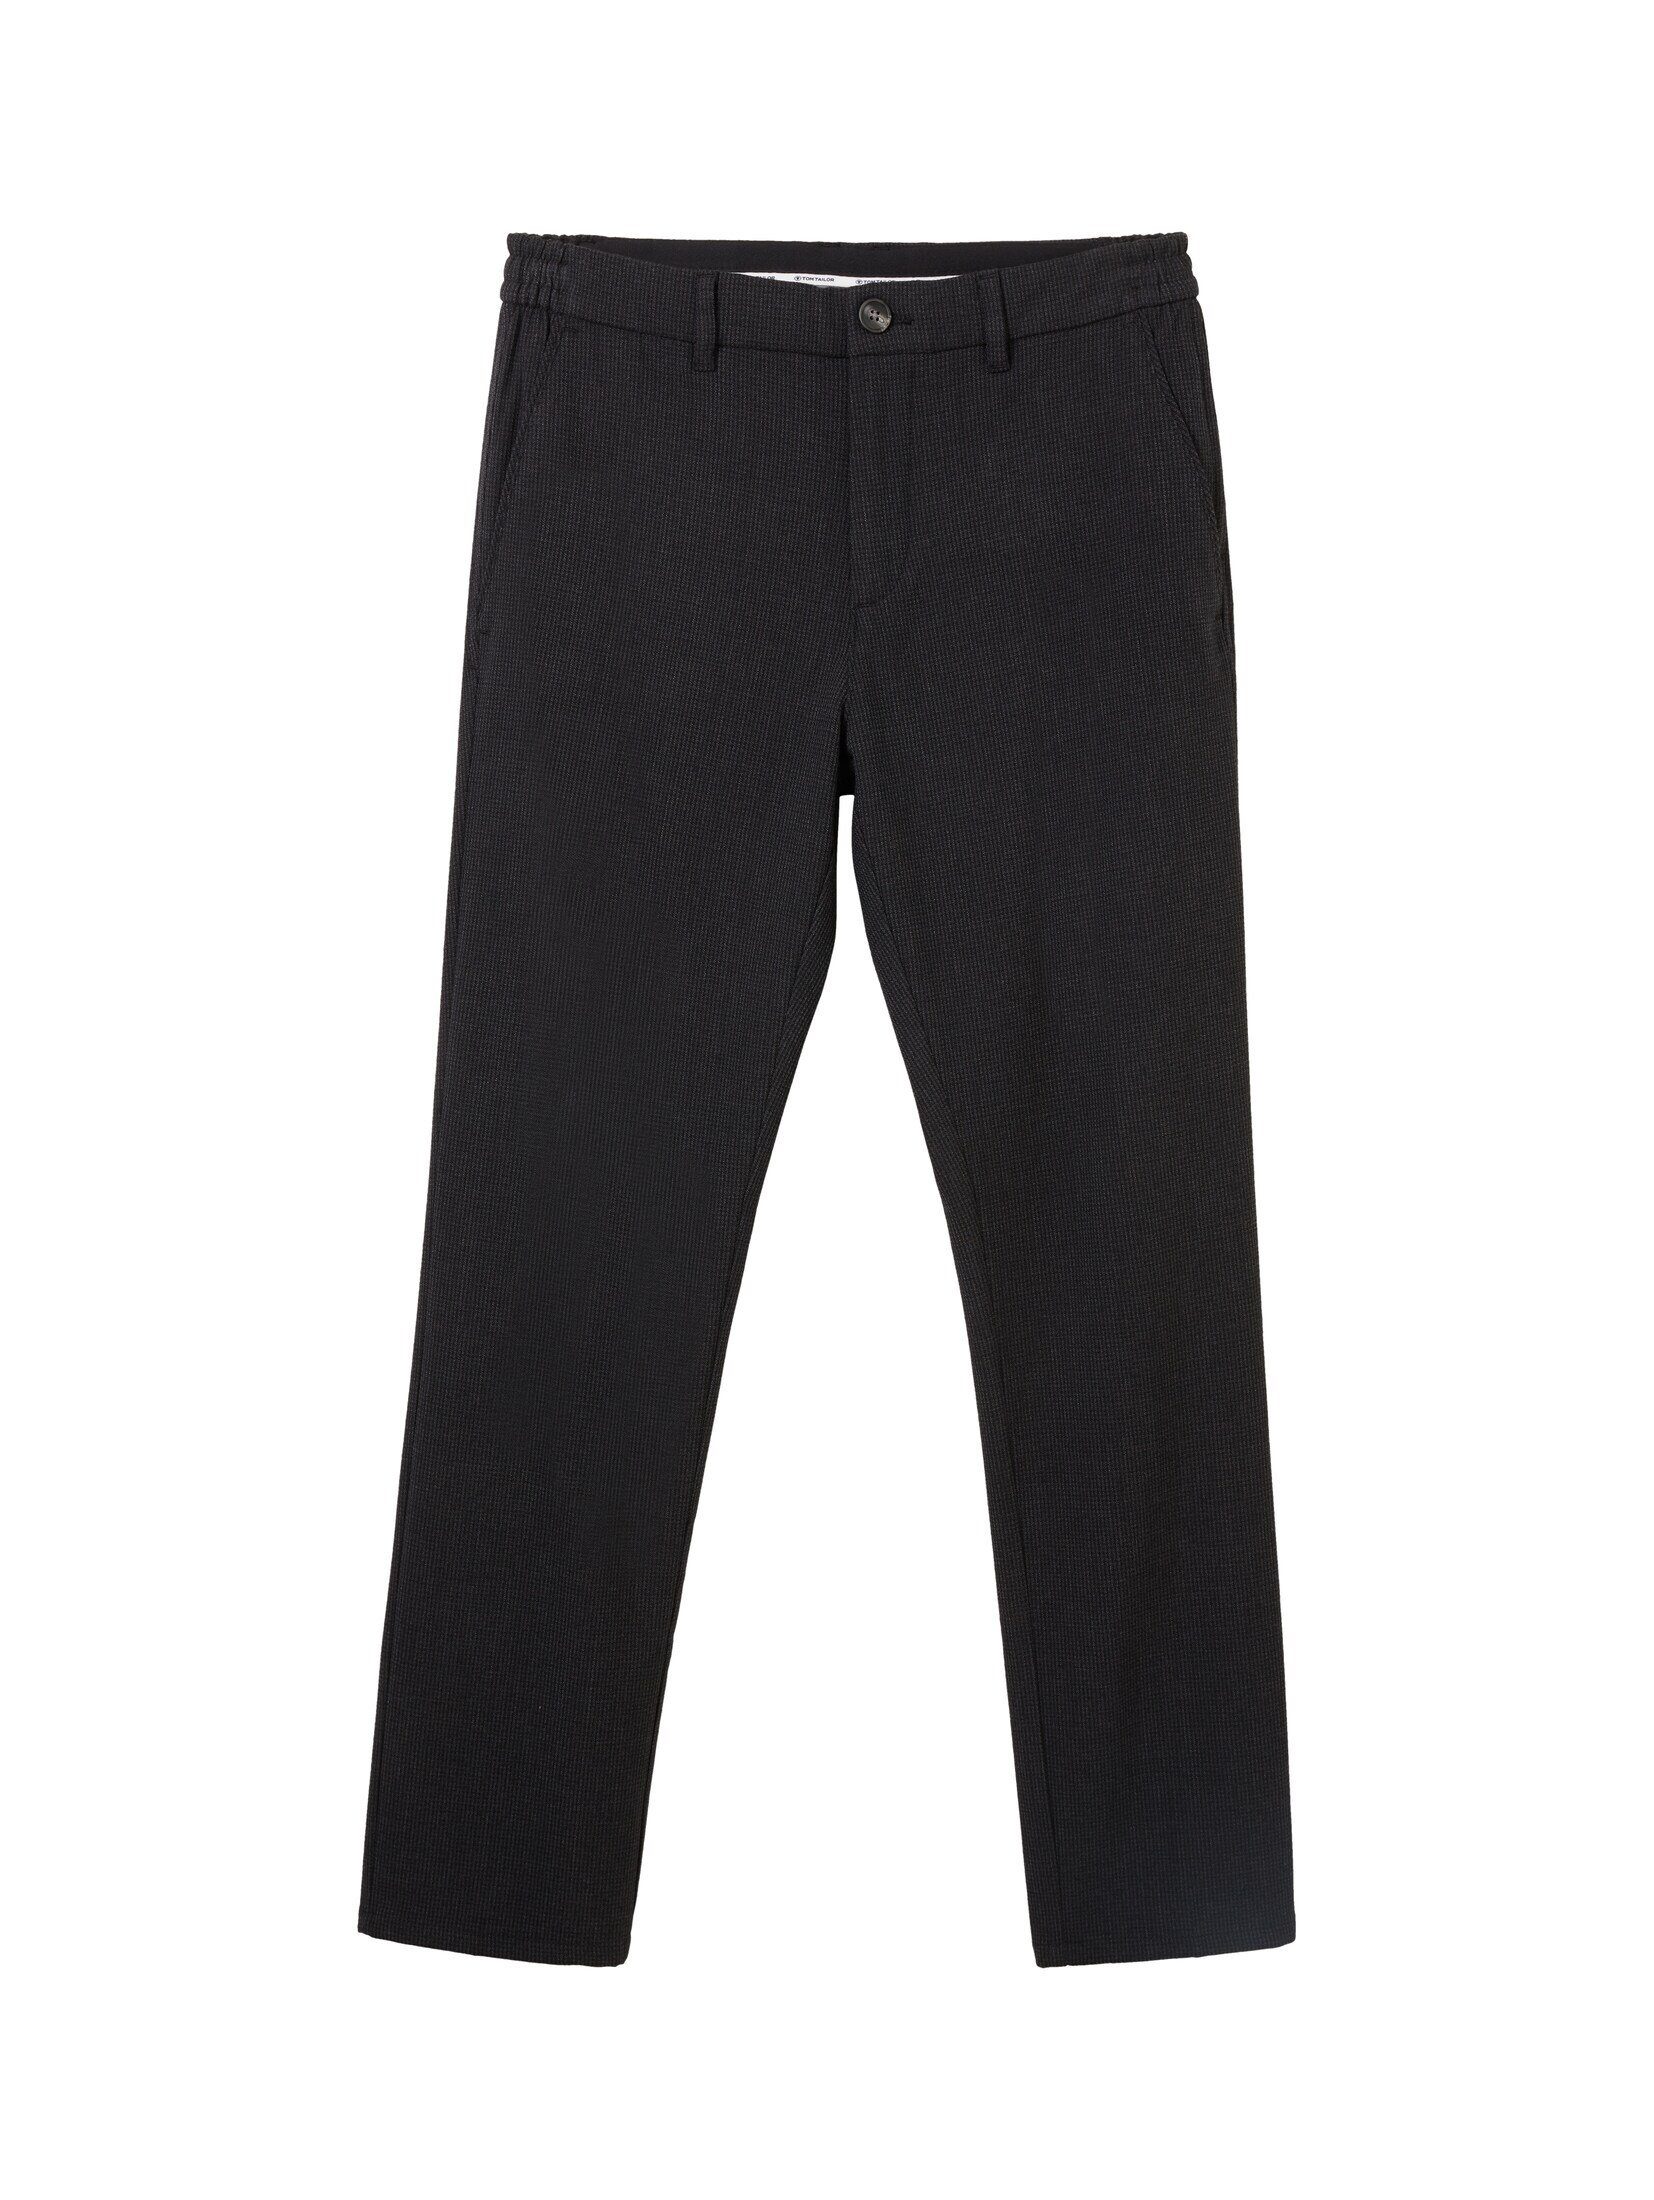 TAILOR Chinohose structure TOM black Chino Regular dotted